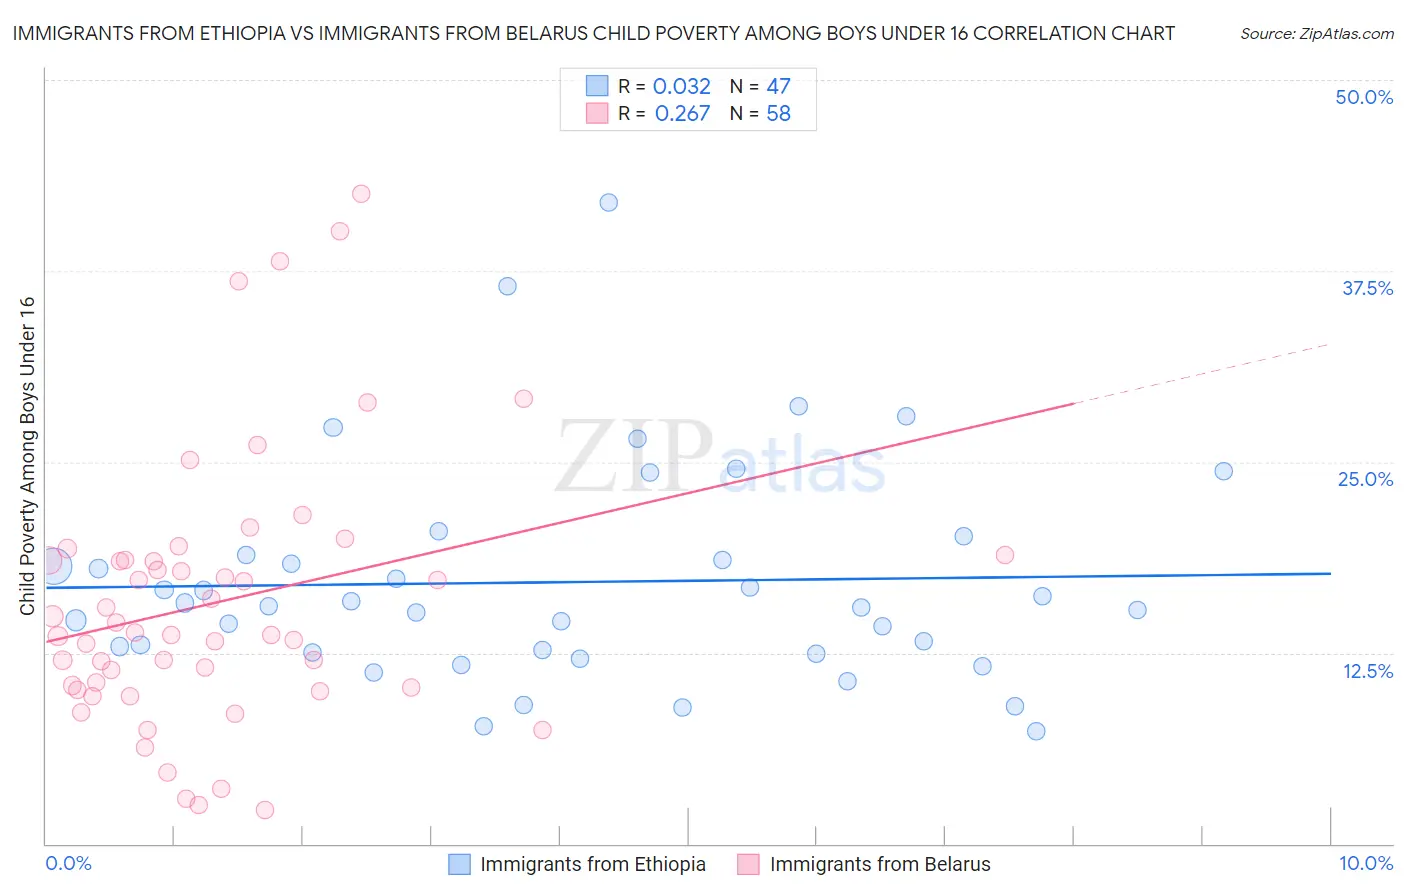 Immigrants from Ethiopia vs Immigrants from Belarus Child Poverty Among Boys Under 16